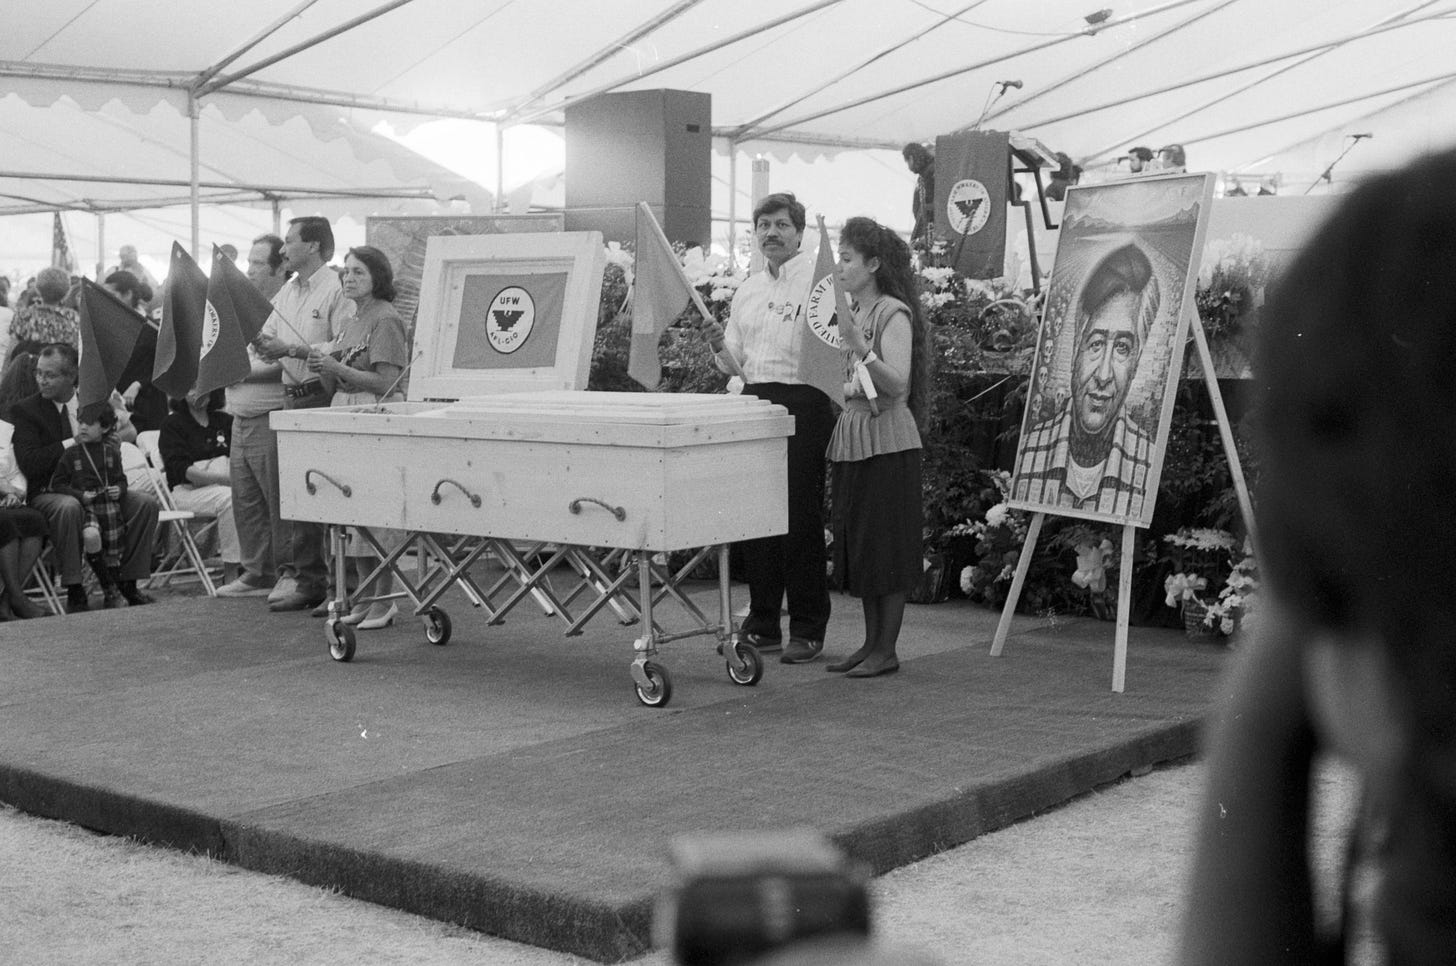 The body of César Chávez lies in repose during his funeral at Forty Acres. His body lies in a simple pine wood coffin made by his brother Richard Chávez at his request. A UFW banner adorns his coffin and the portrait of Chávez by Mexican artist Octavio Ocampo stands next to it. Dolores Huerta stands near the coffin holding a union flag. Photo by John Kouns © Tom and Ethel Bradley Center